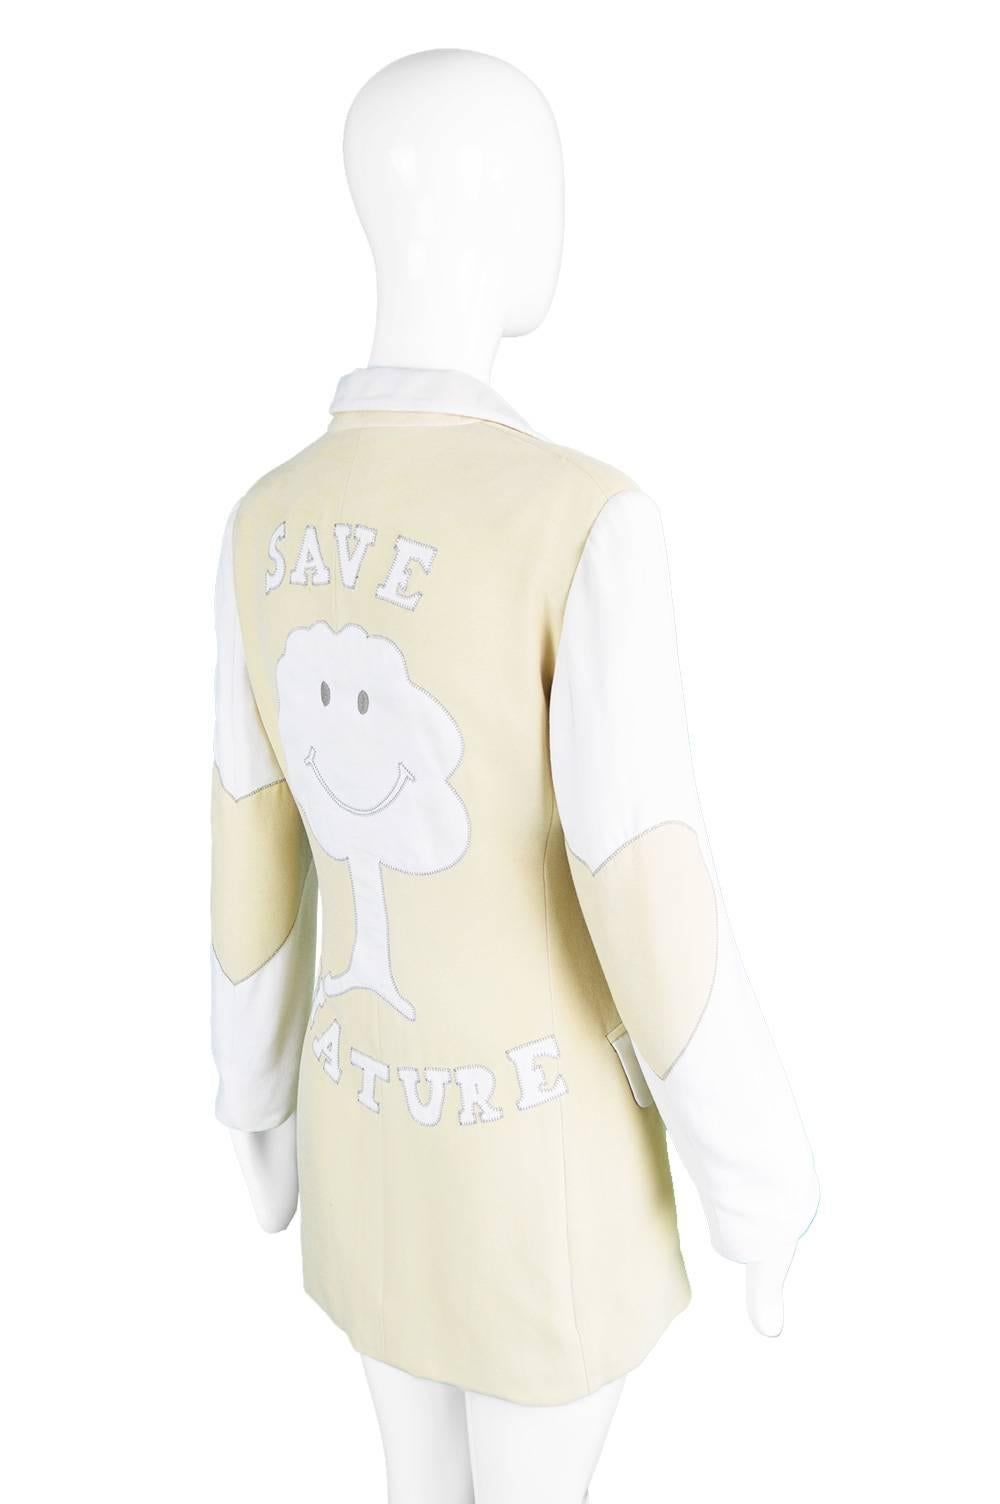 Beige Moschino 'Save Nature' Eco-couture Jacket - Franco's Final Collection, 1994